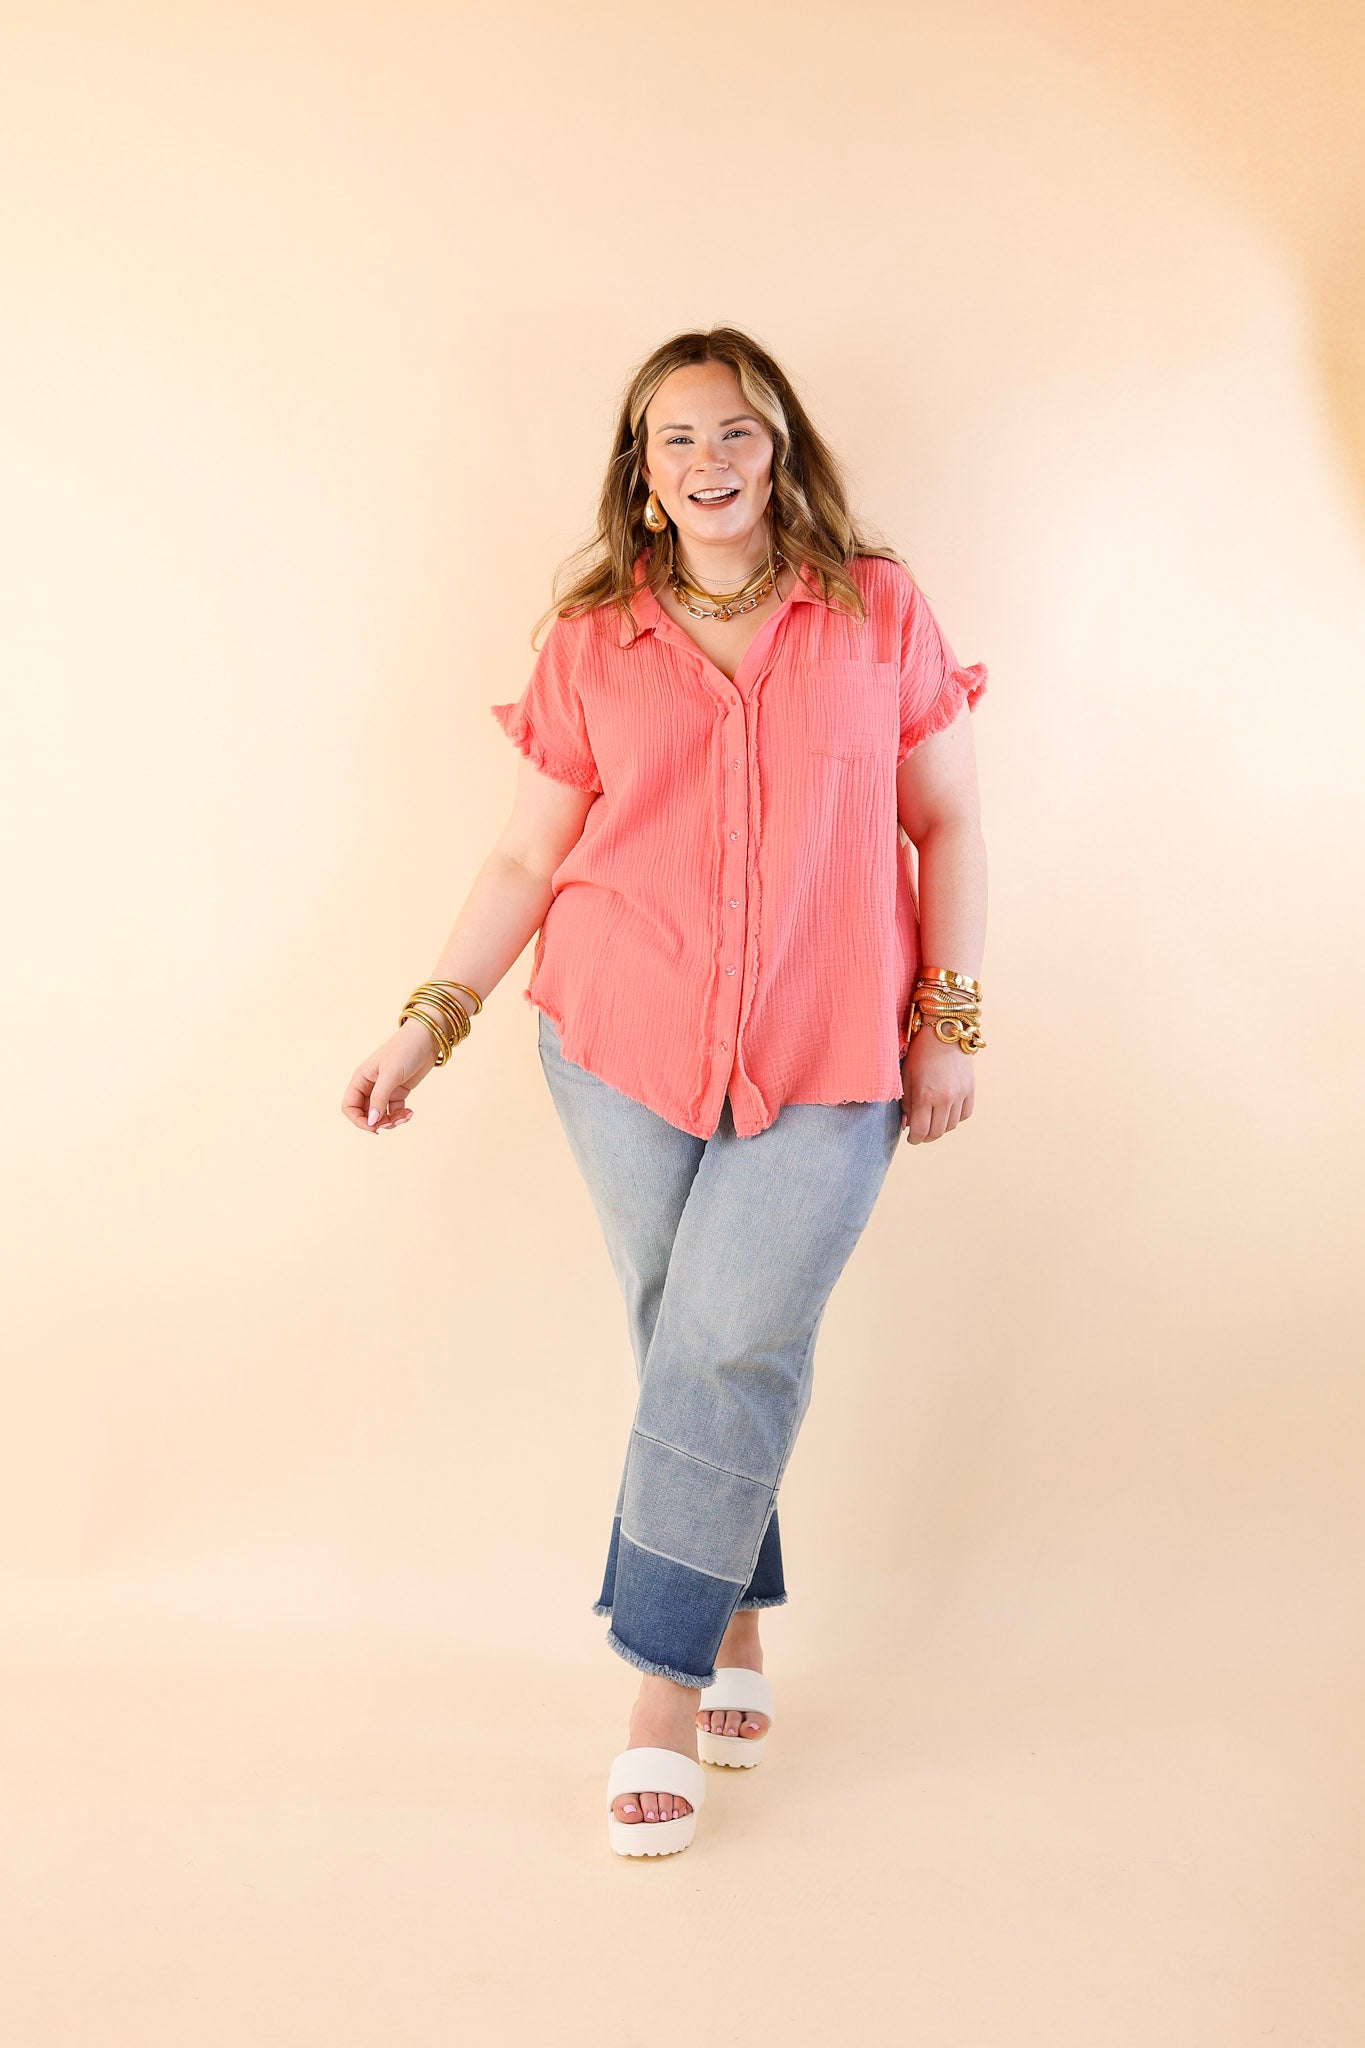 Right On Cue Button Up Raw Hem Top in Coral Pink - Giddy Up Glamour Boutique